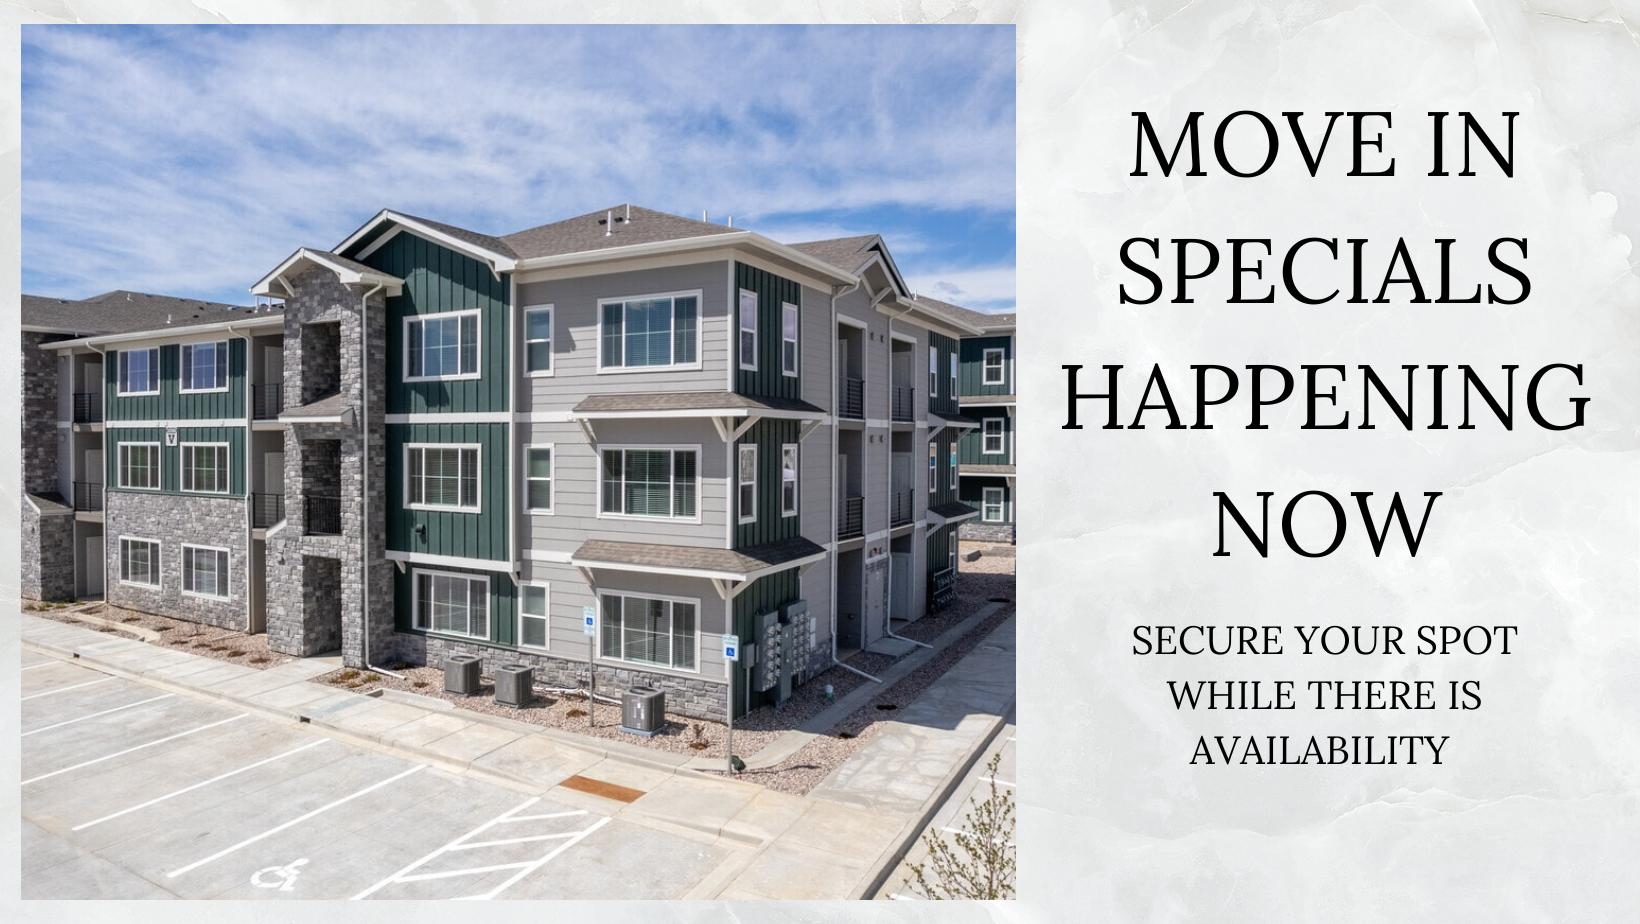 Move In Specials Happening Now - Secure Your Spot WHile There Is Availability